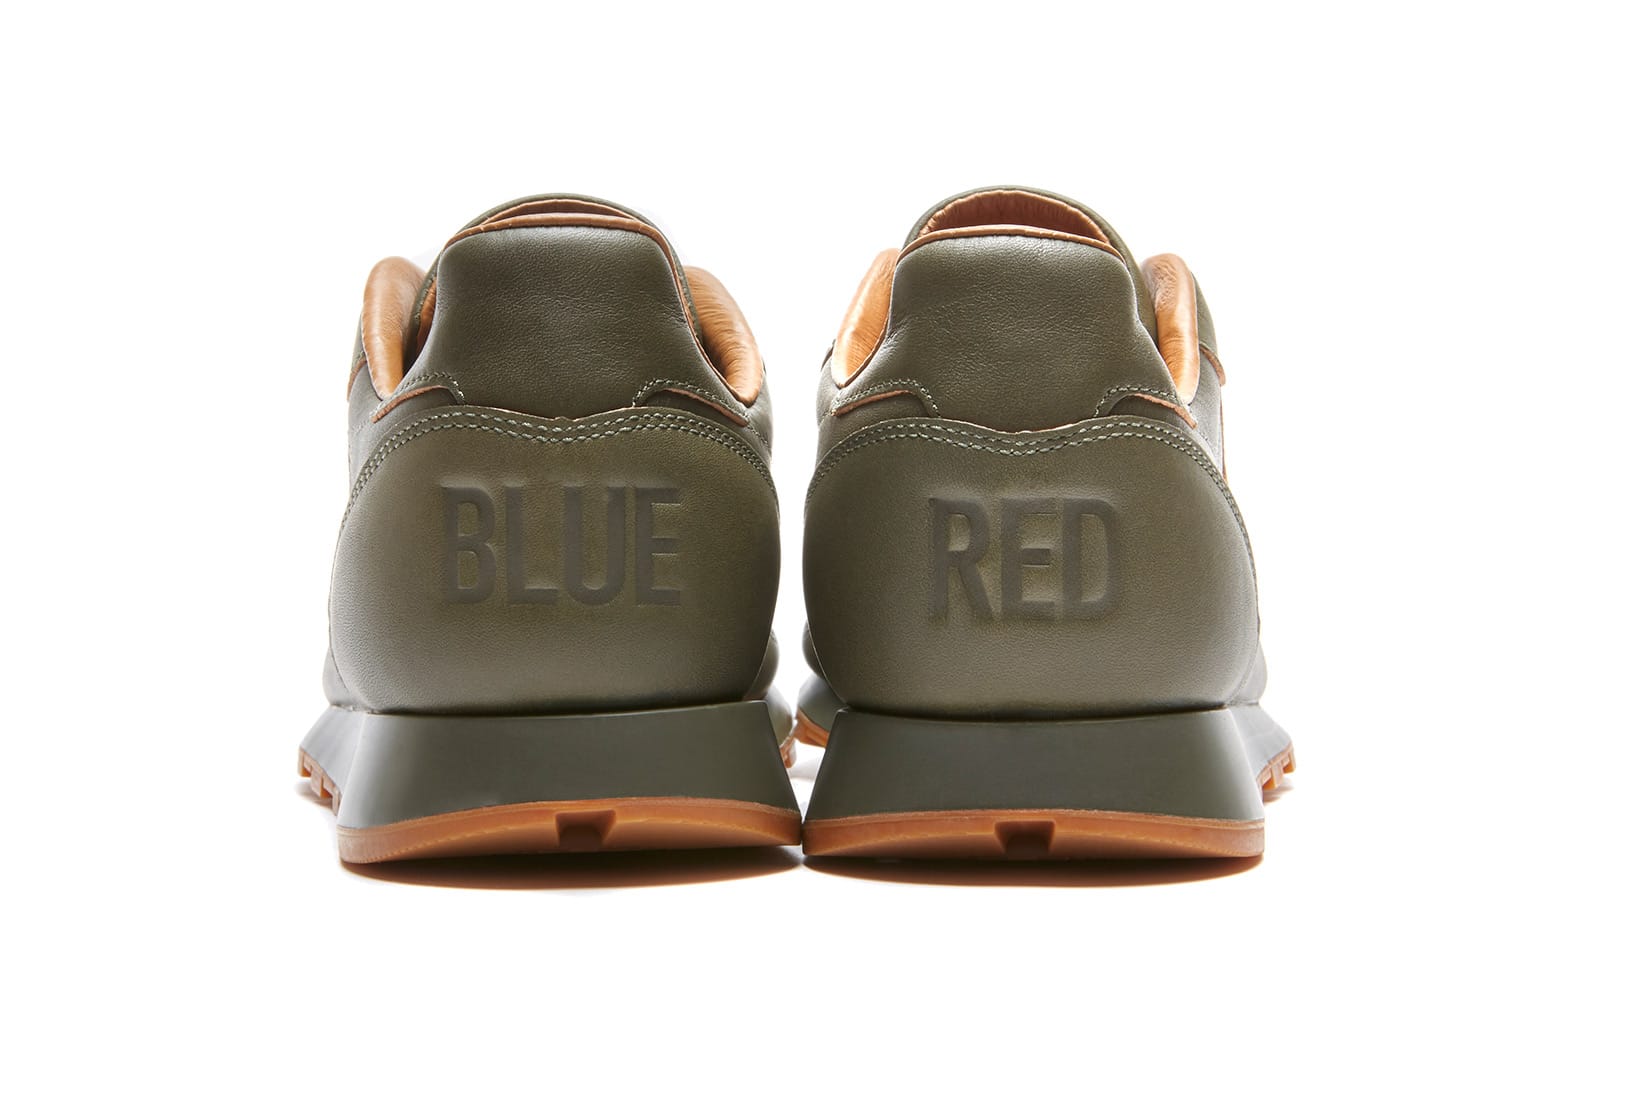 kendrick lamar red and blue shoes